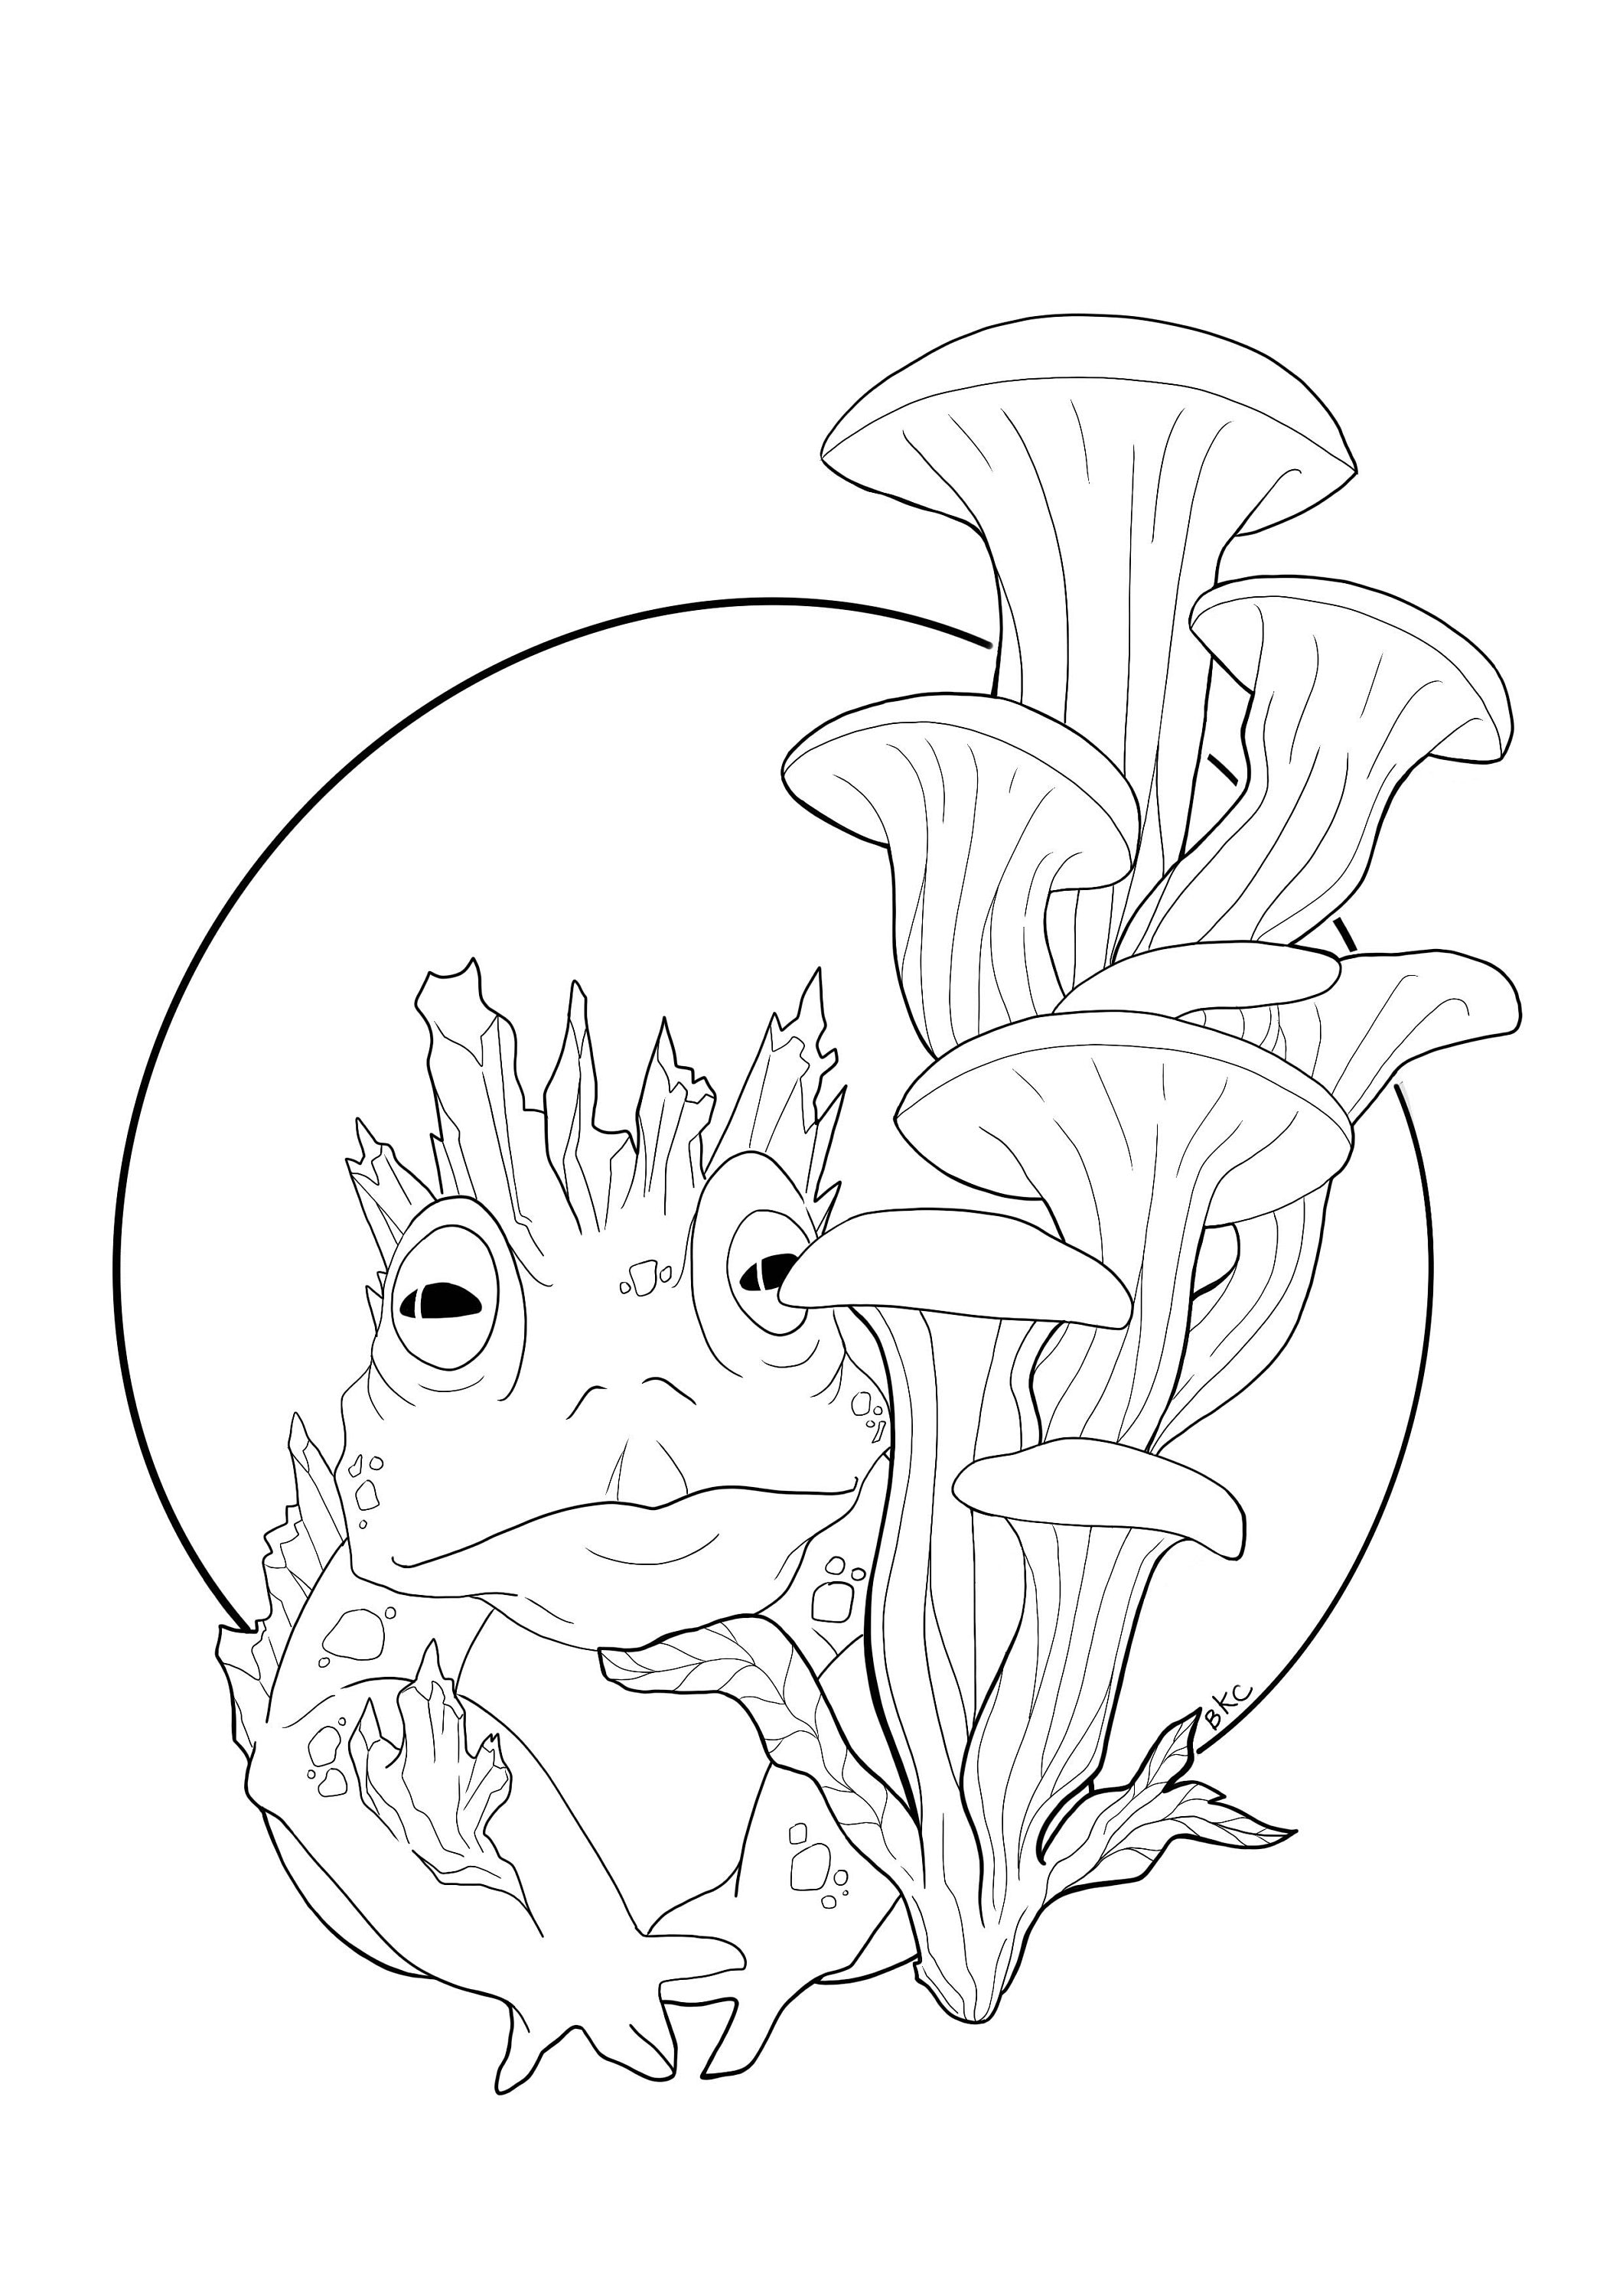 Crystal frog coloring page coloring book pages for adults and kids coloring sheets coloring designs